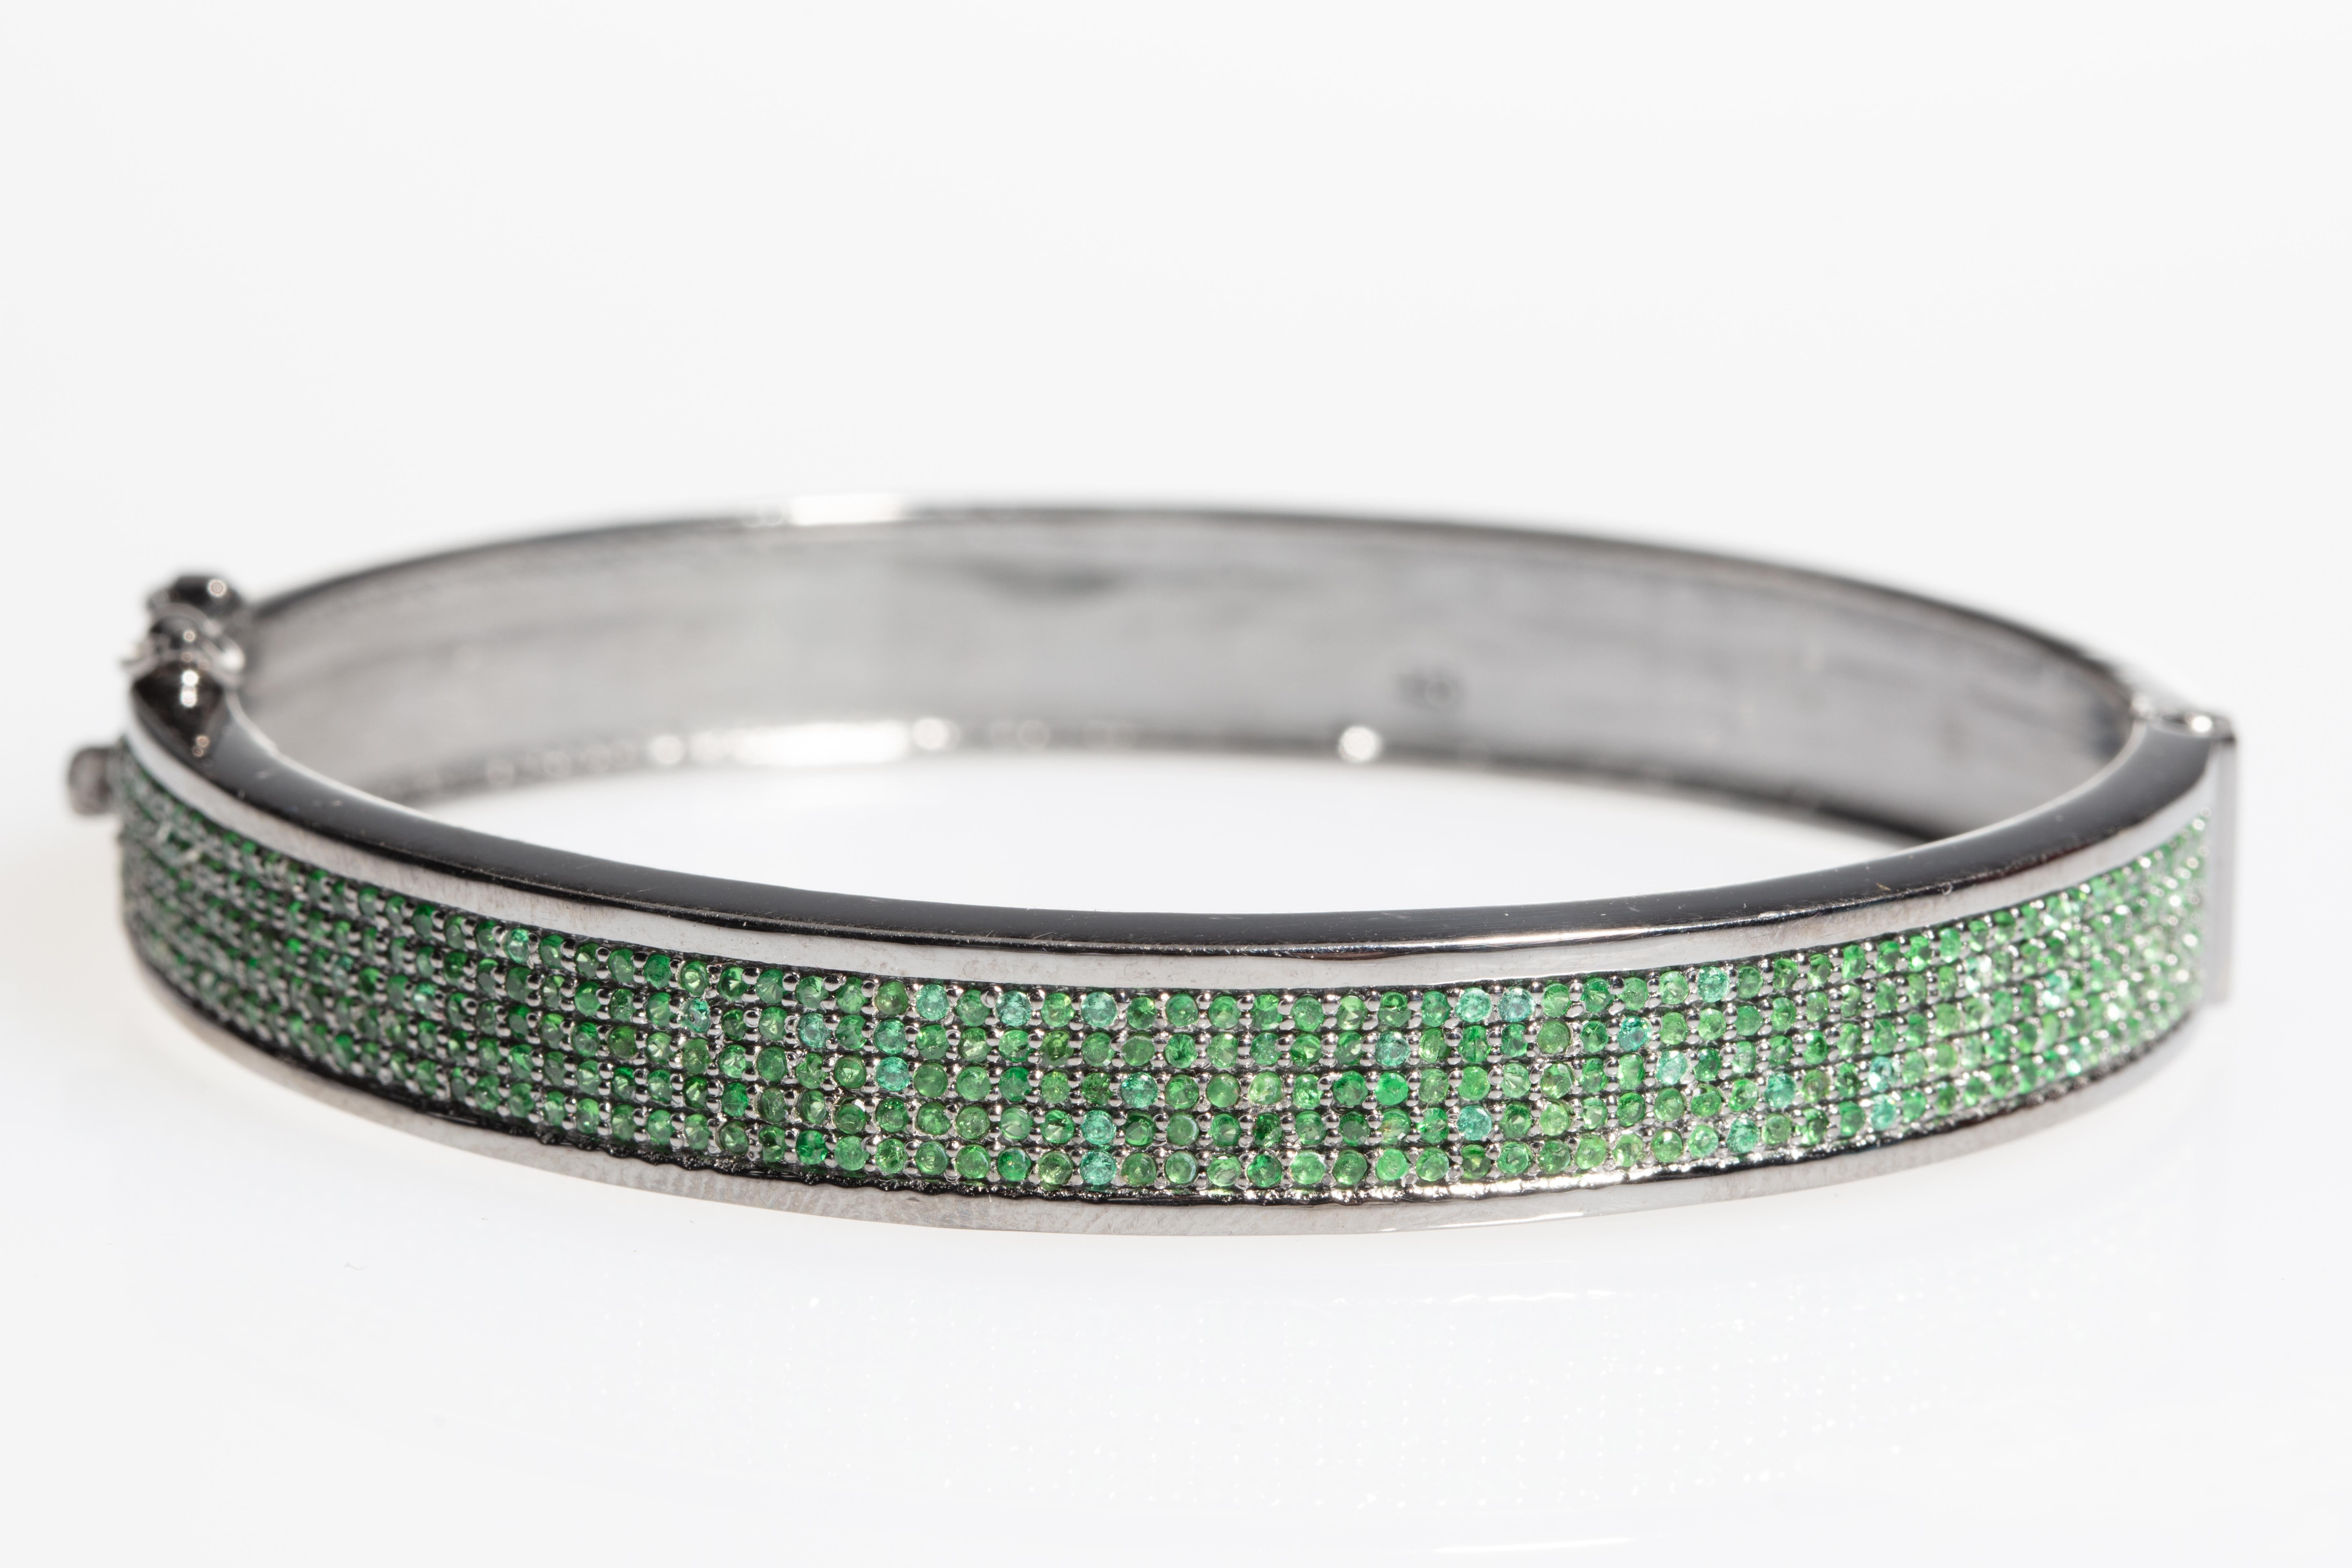 An oxidized sterling silver, oval-shaped bangle with 5 lines of brilliant-cut emeralds in a pave' setting.  Push clasp with side safety.  Weight of emeralds is 1.77 carats.  Oval shape keeps the emerald embellishment on top of the wrist, yet easily